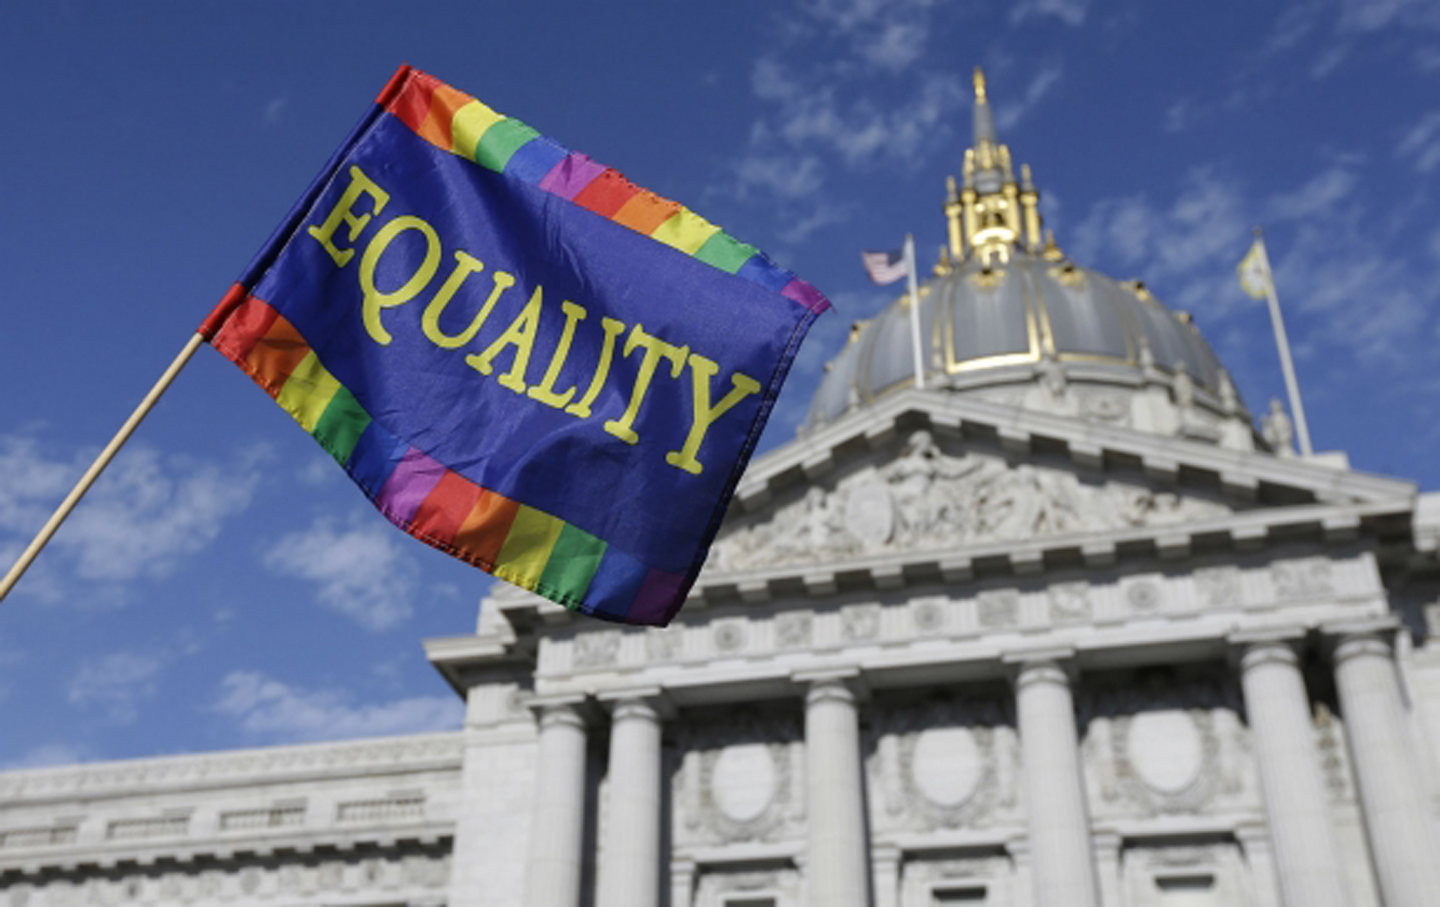 The Next Tactic In the Right’s Fight Against Gay Marriage? ‘Religious Liberty’